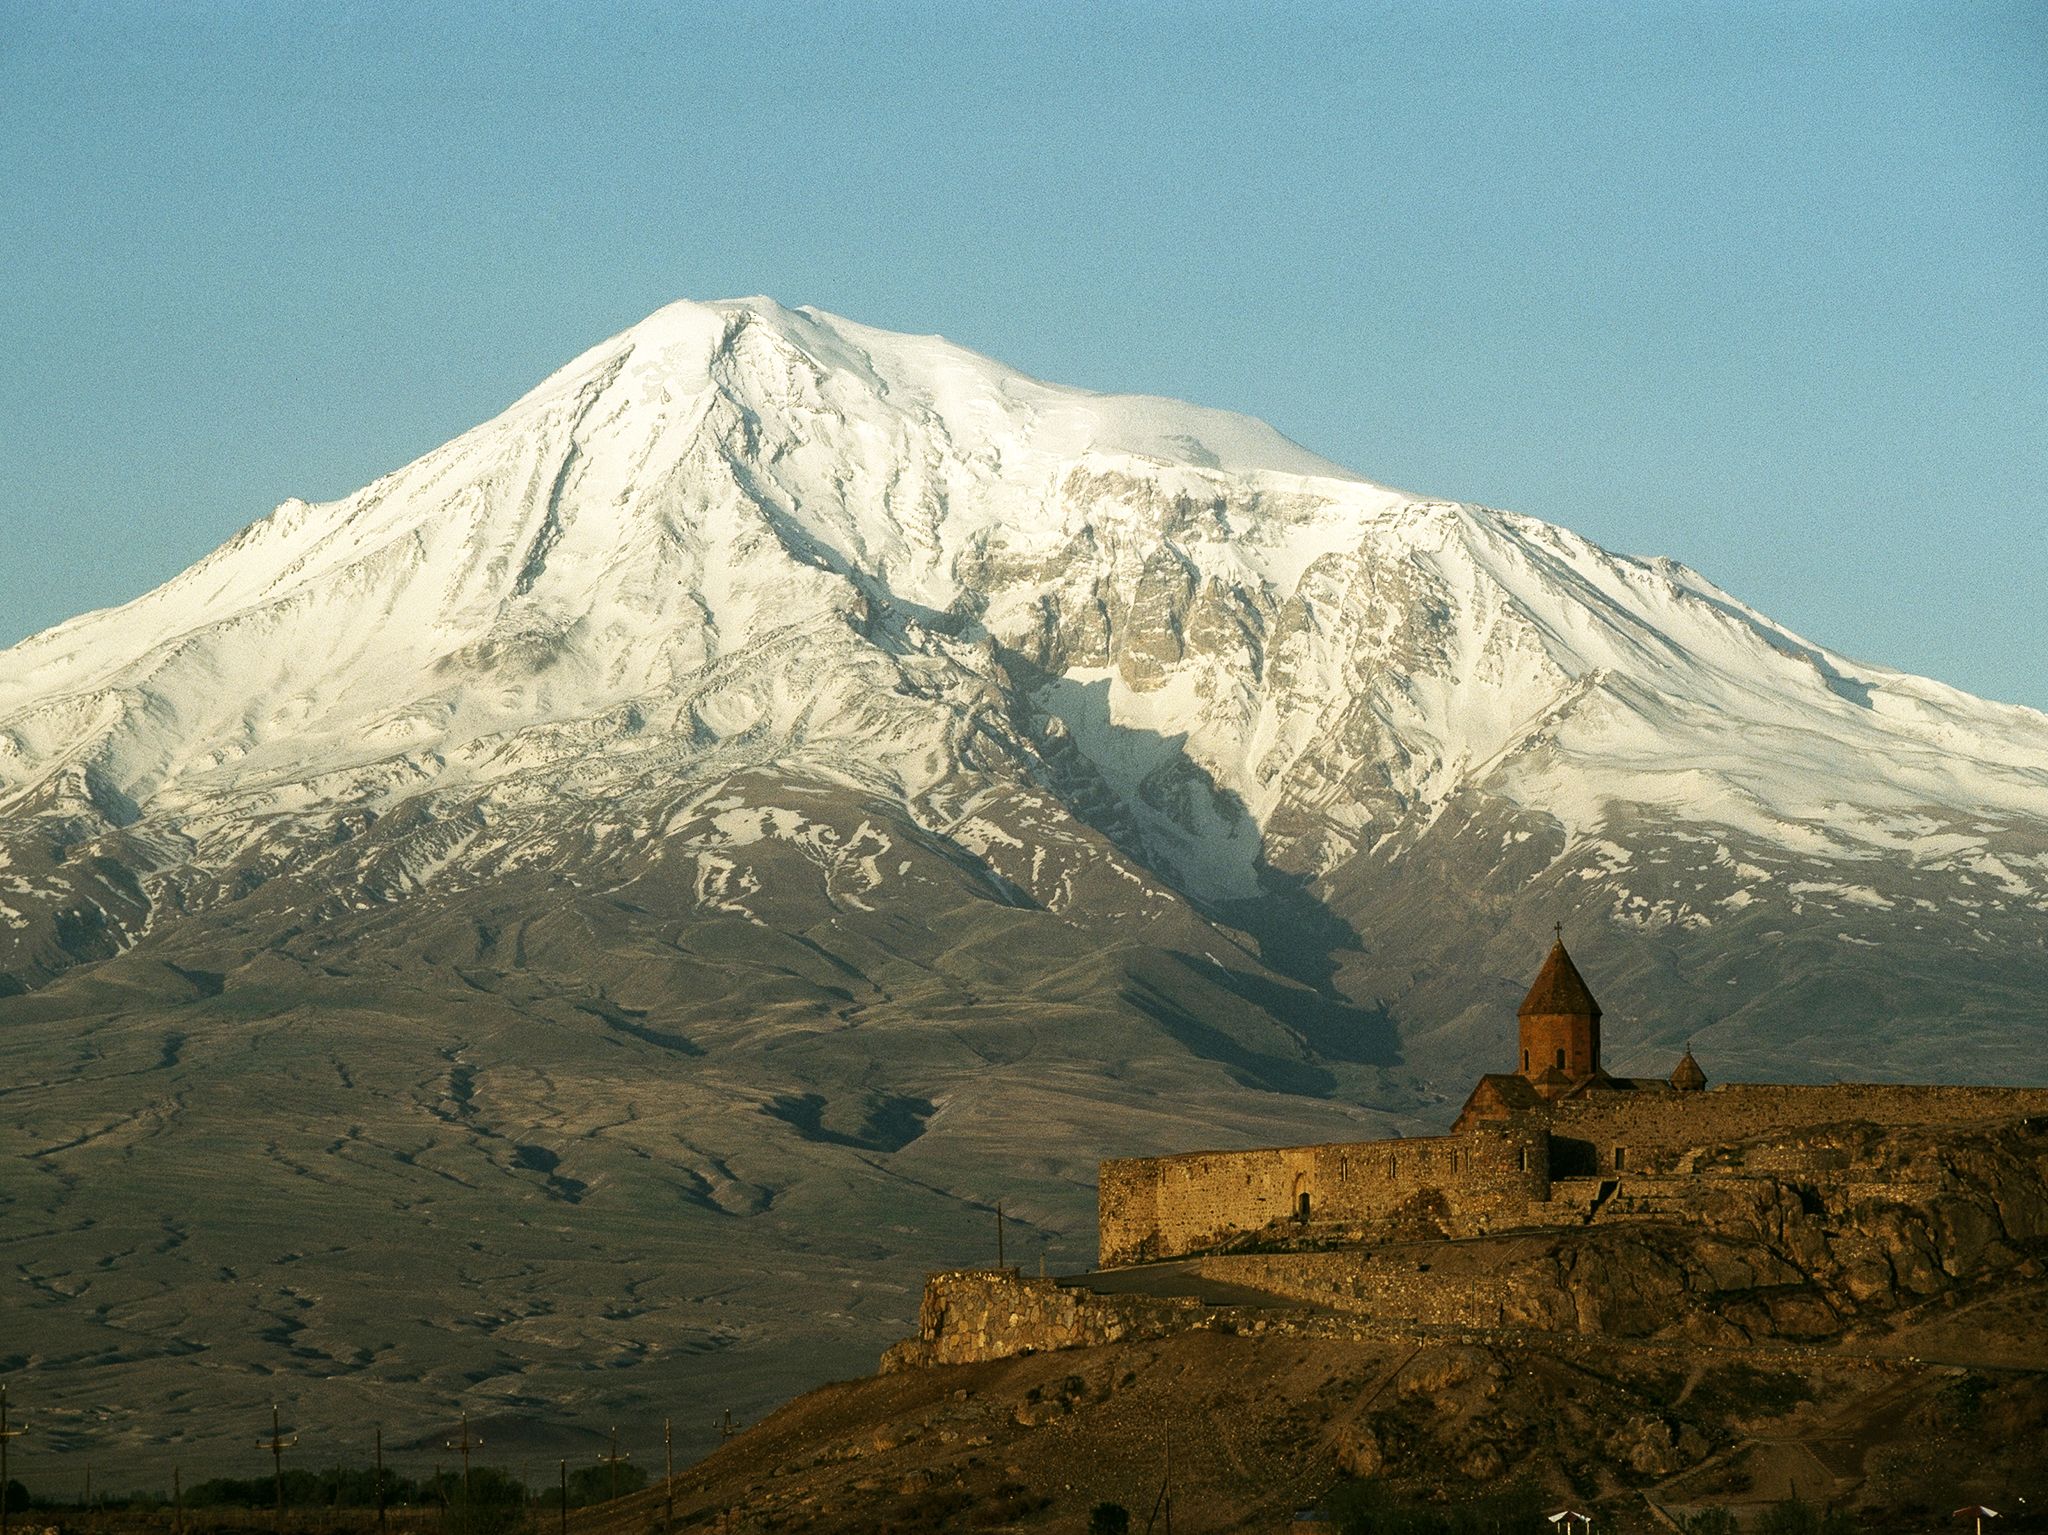 Mount Ararat, Turkey, viewed from Khor Viraph. This image is from Riddles of the Bible. [Photo of the day - August 2017]